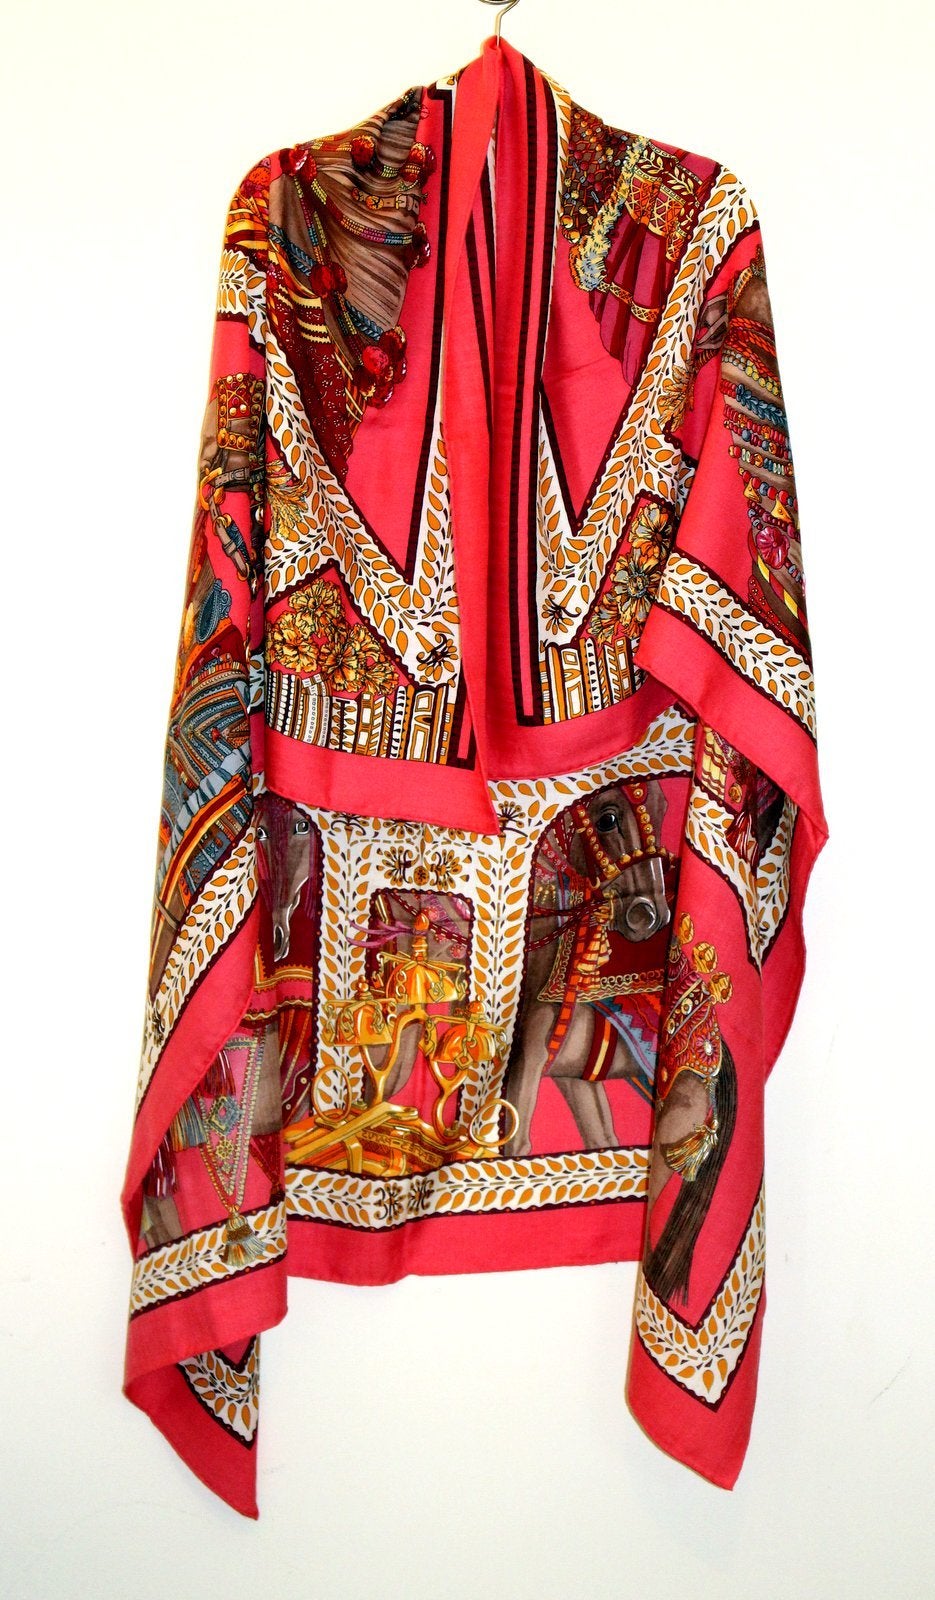 Absolutely pristine, this Hermès La Danse Du Cheval Cashmere and Silk GM Shawl still has the tag attached.   The Annie Faivre design features tassel adorned regal steeds on a fuchsia background with multicolored accents. It may be worn as a shawl or